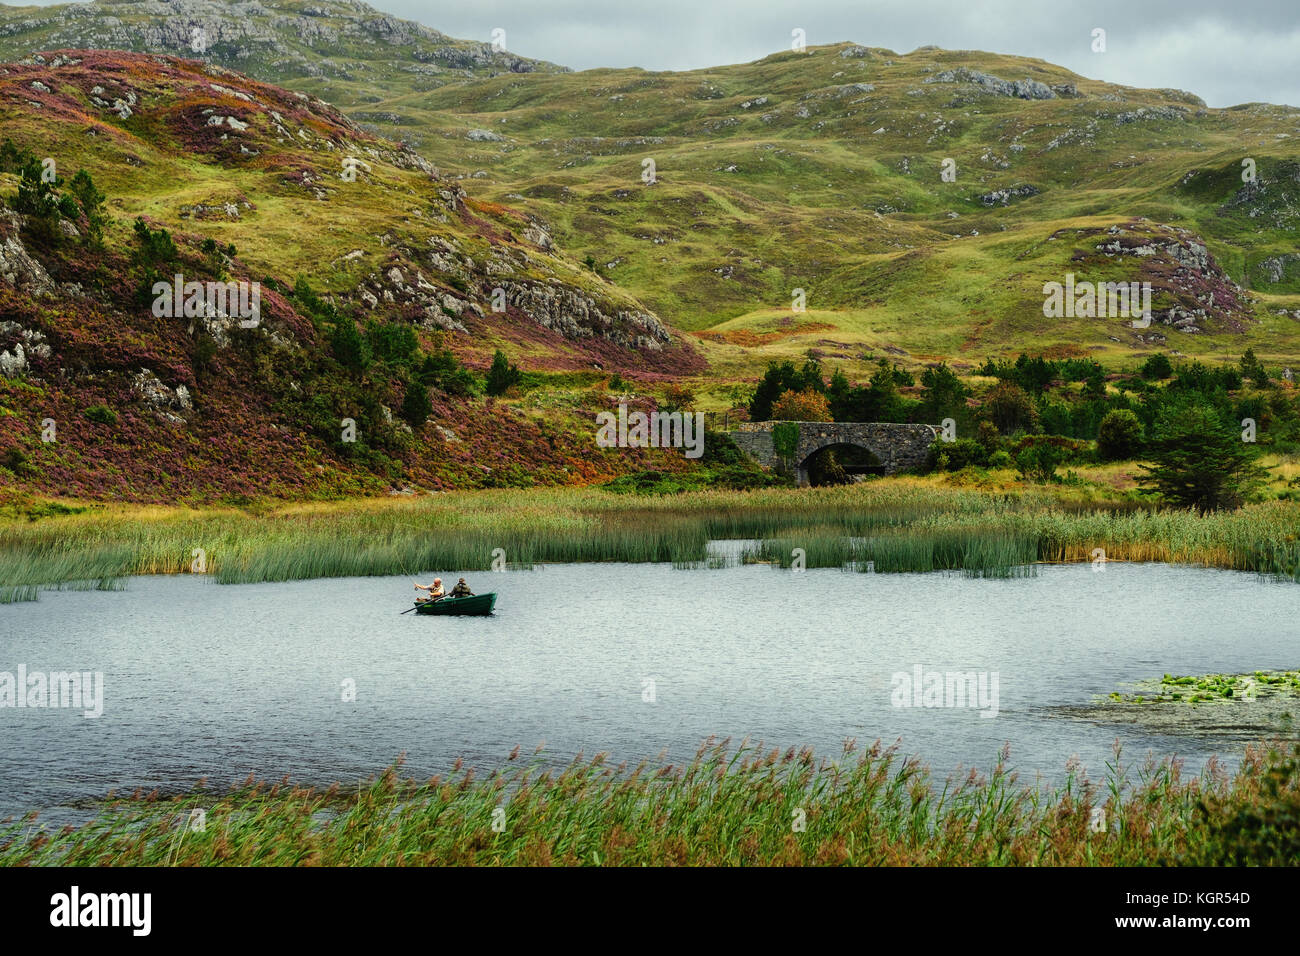 Fly Fisherman fish from a small boat on a lake in the scottish highlands, Scotland Stock Photo